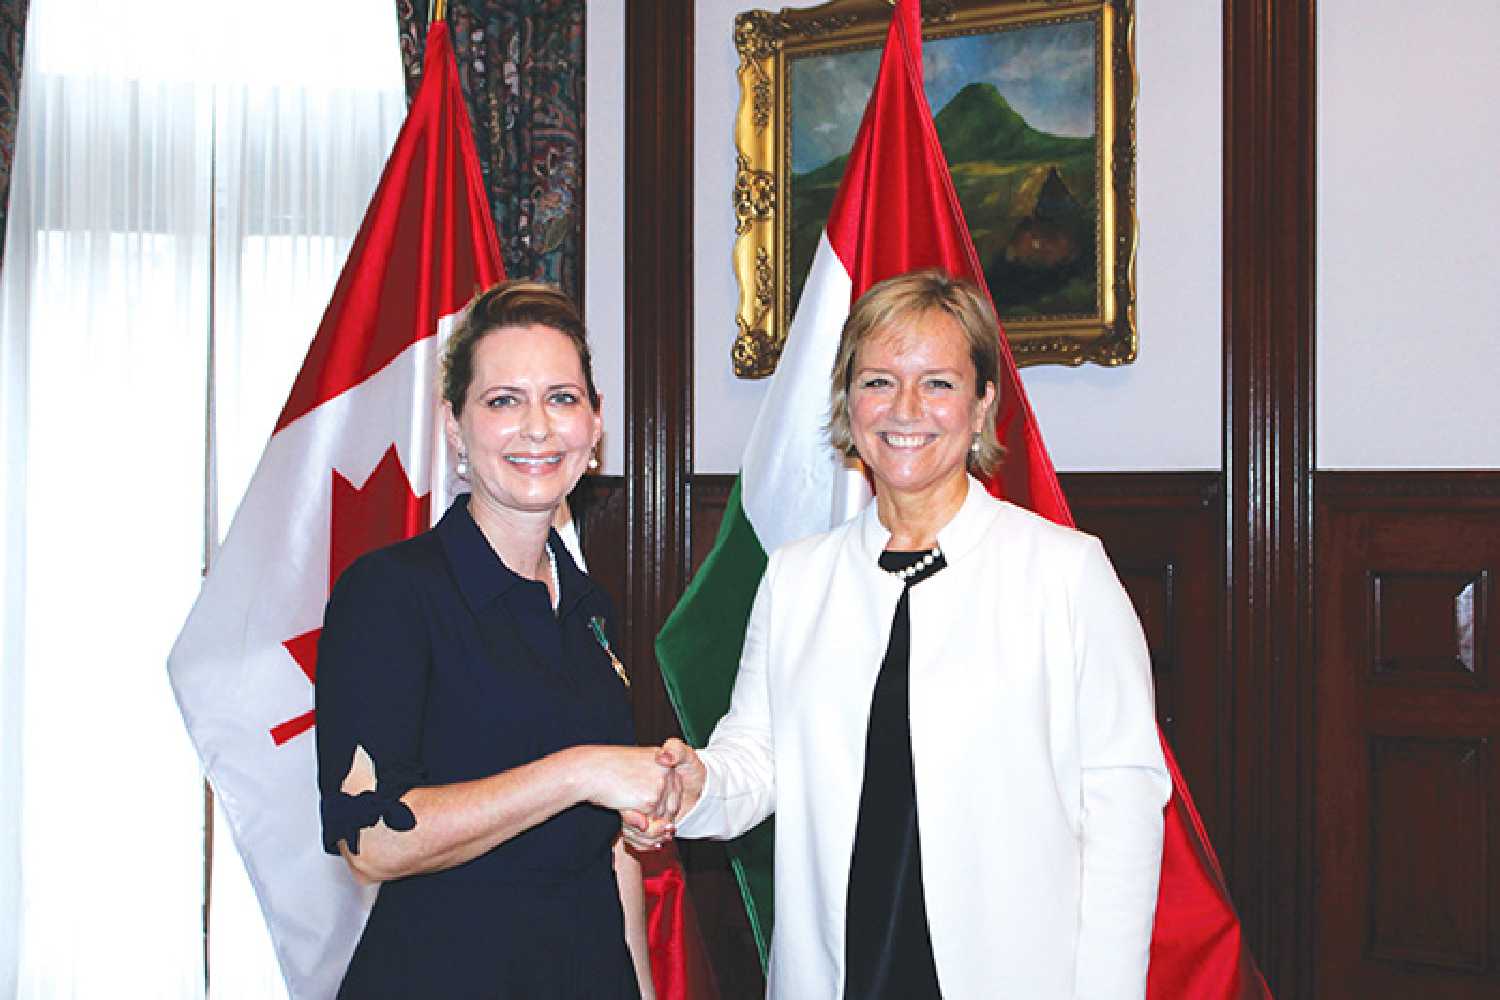 Candace Barta-Bonk accepting the Knights Cross of the Order of Merit of Hungary from ambassador Mria Vass-Salazar